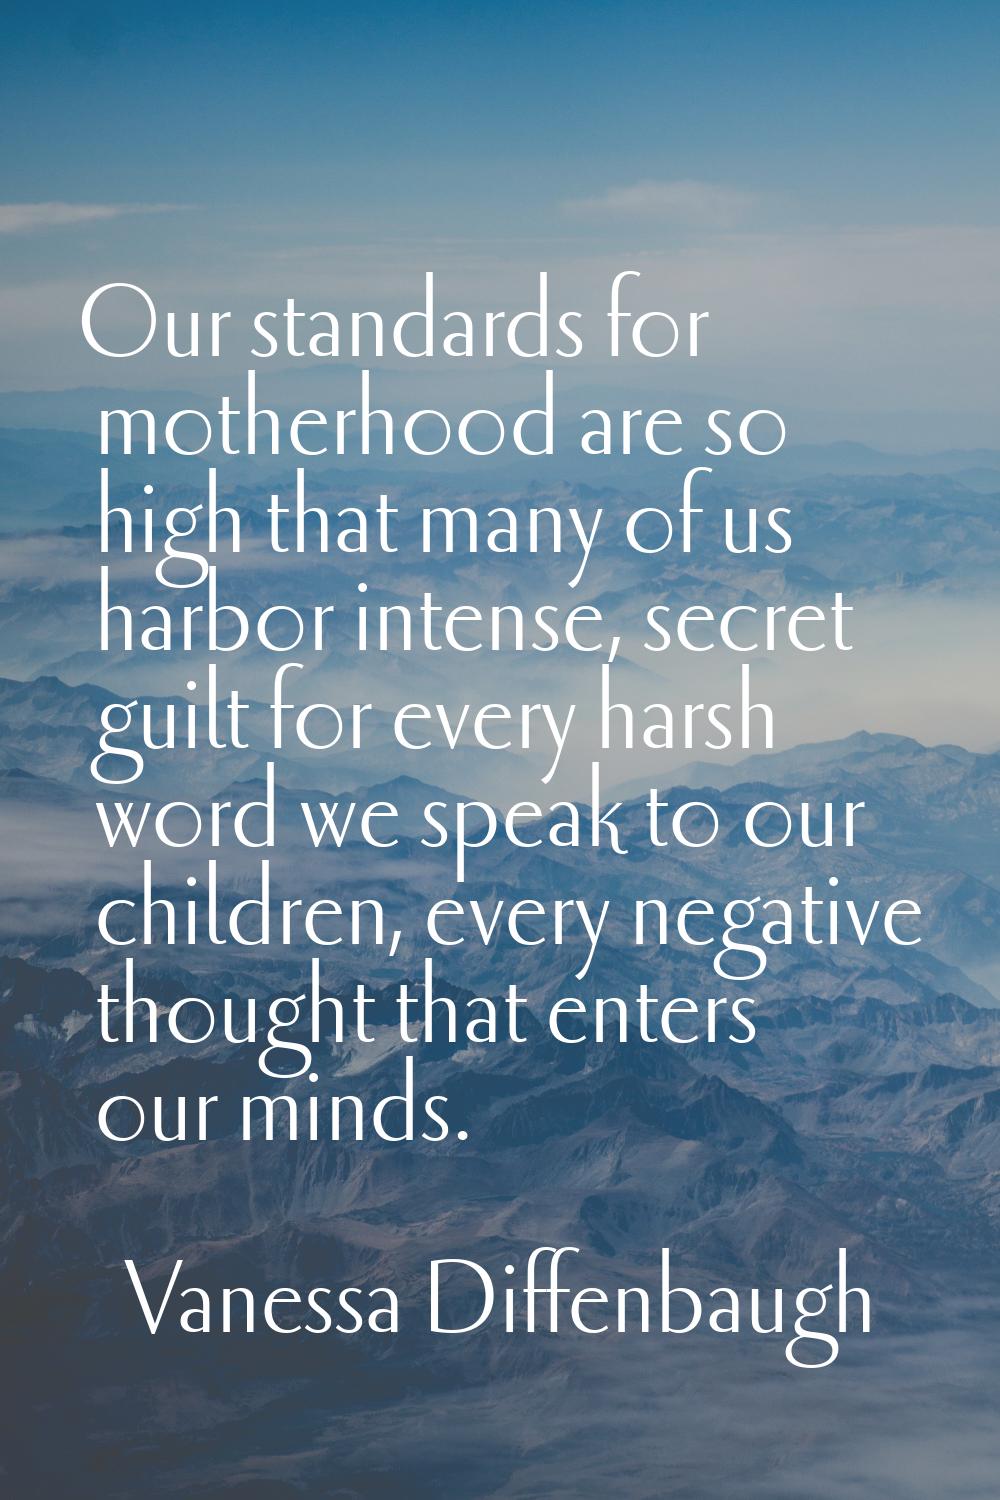 Our standards for motherhood are so high that many of us harbor intense, secret guilt for every har